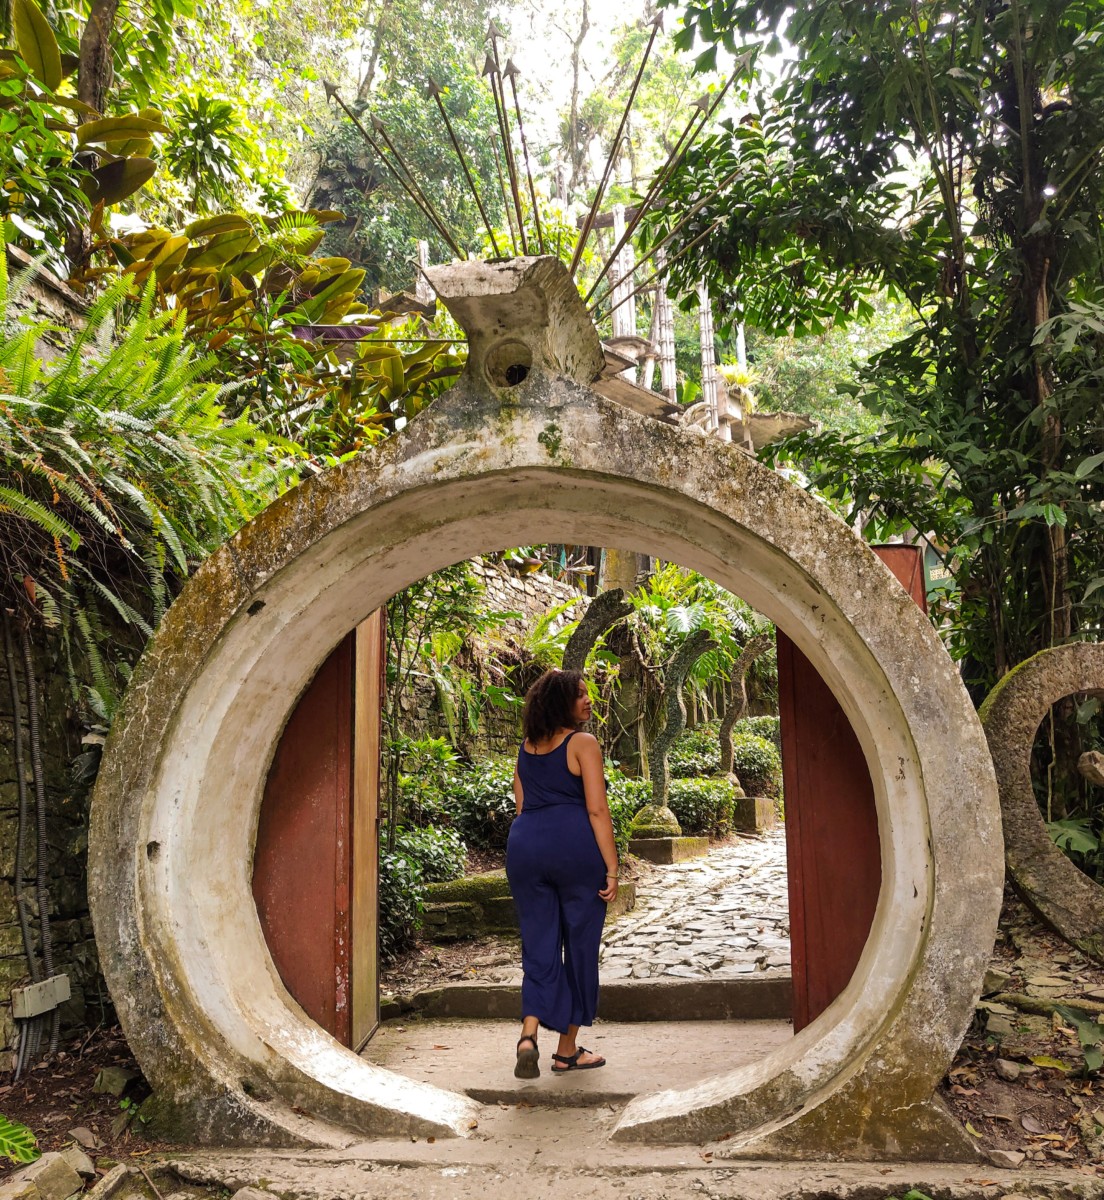 Felly days walks under an archway with tropical vegetation surrounding